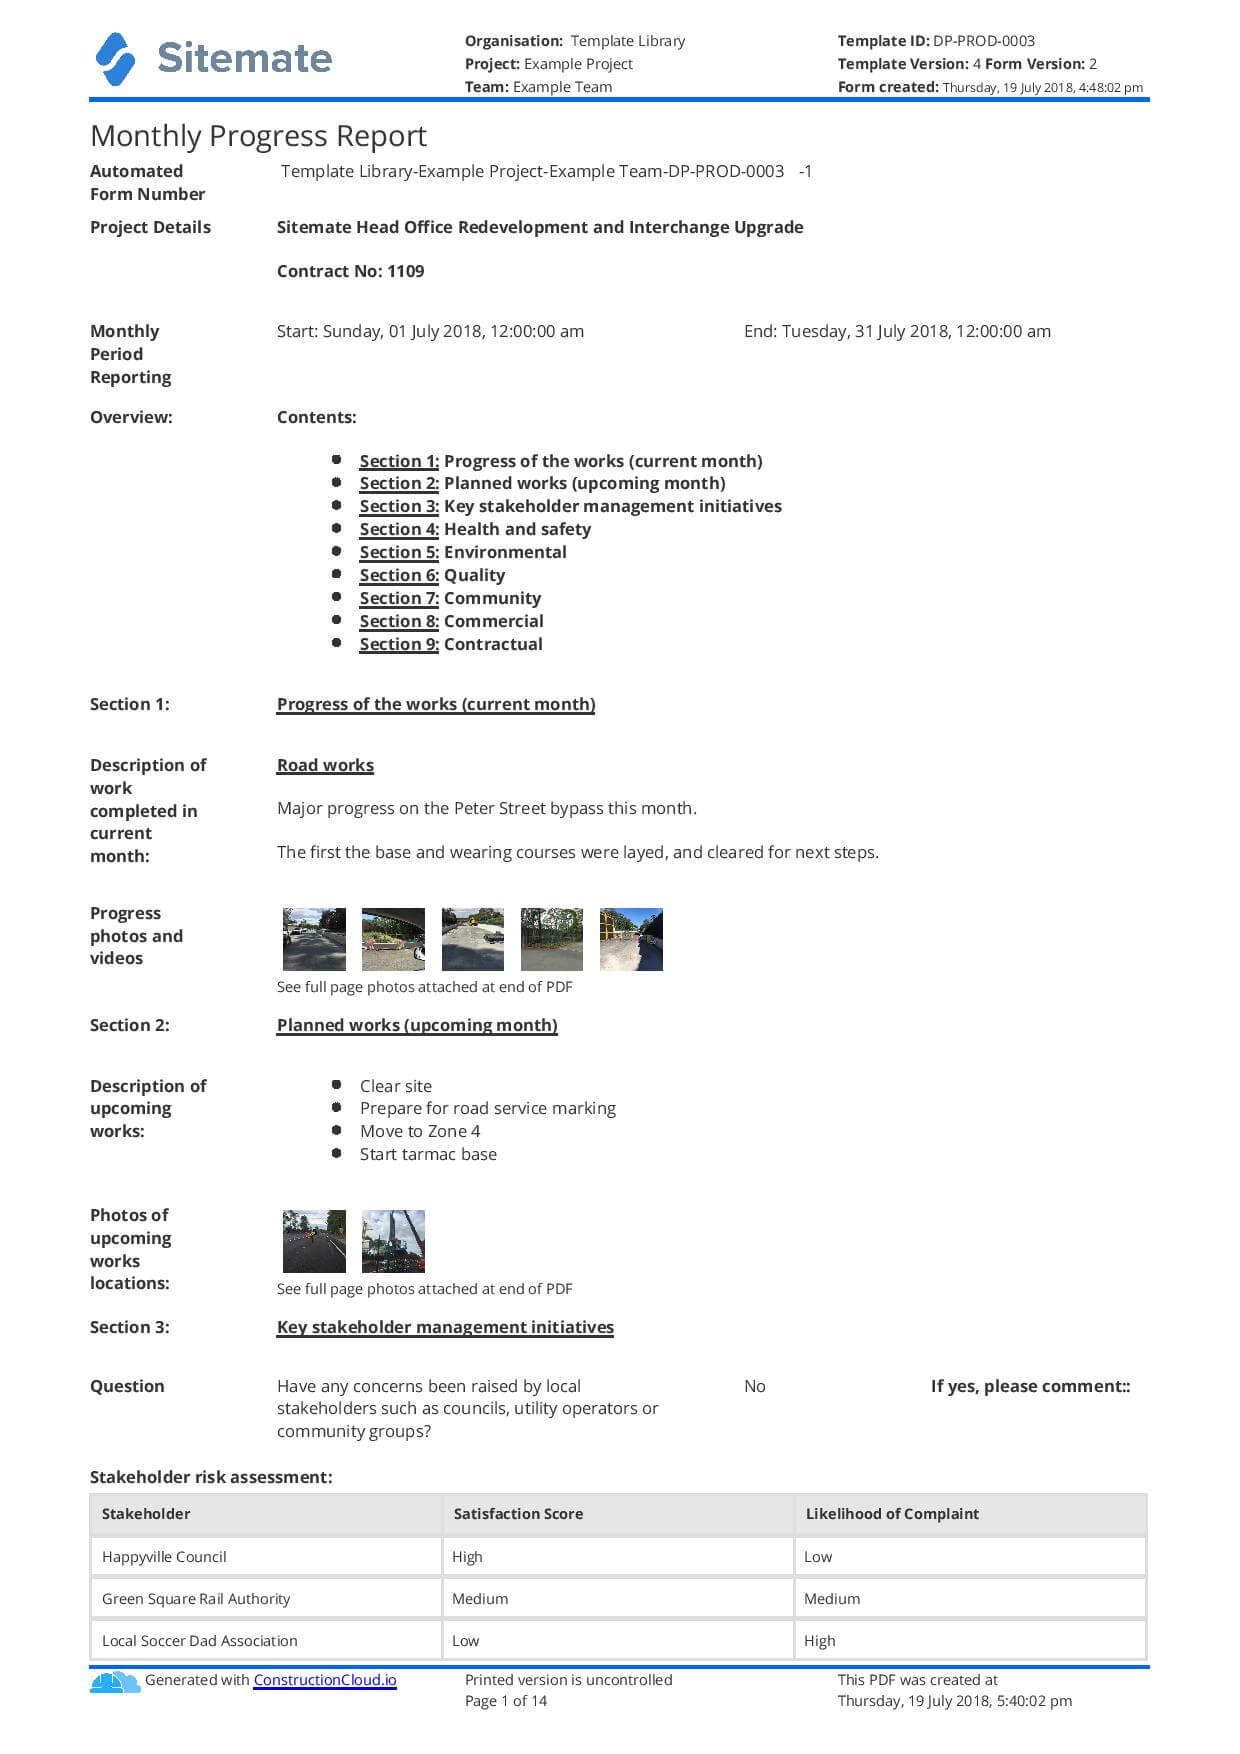 Monthly Construction Progress Report Template: Use This Regarding Progress Report Template For Construction Project